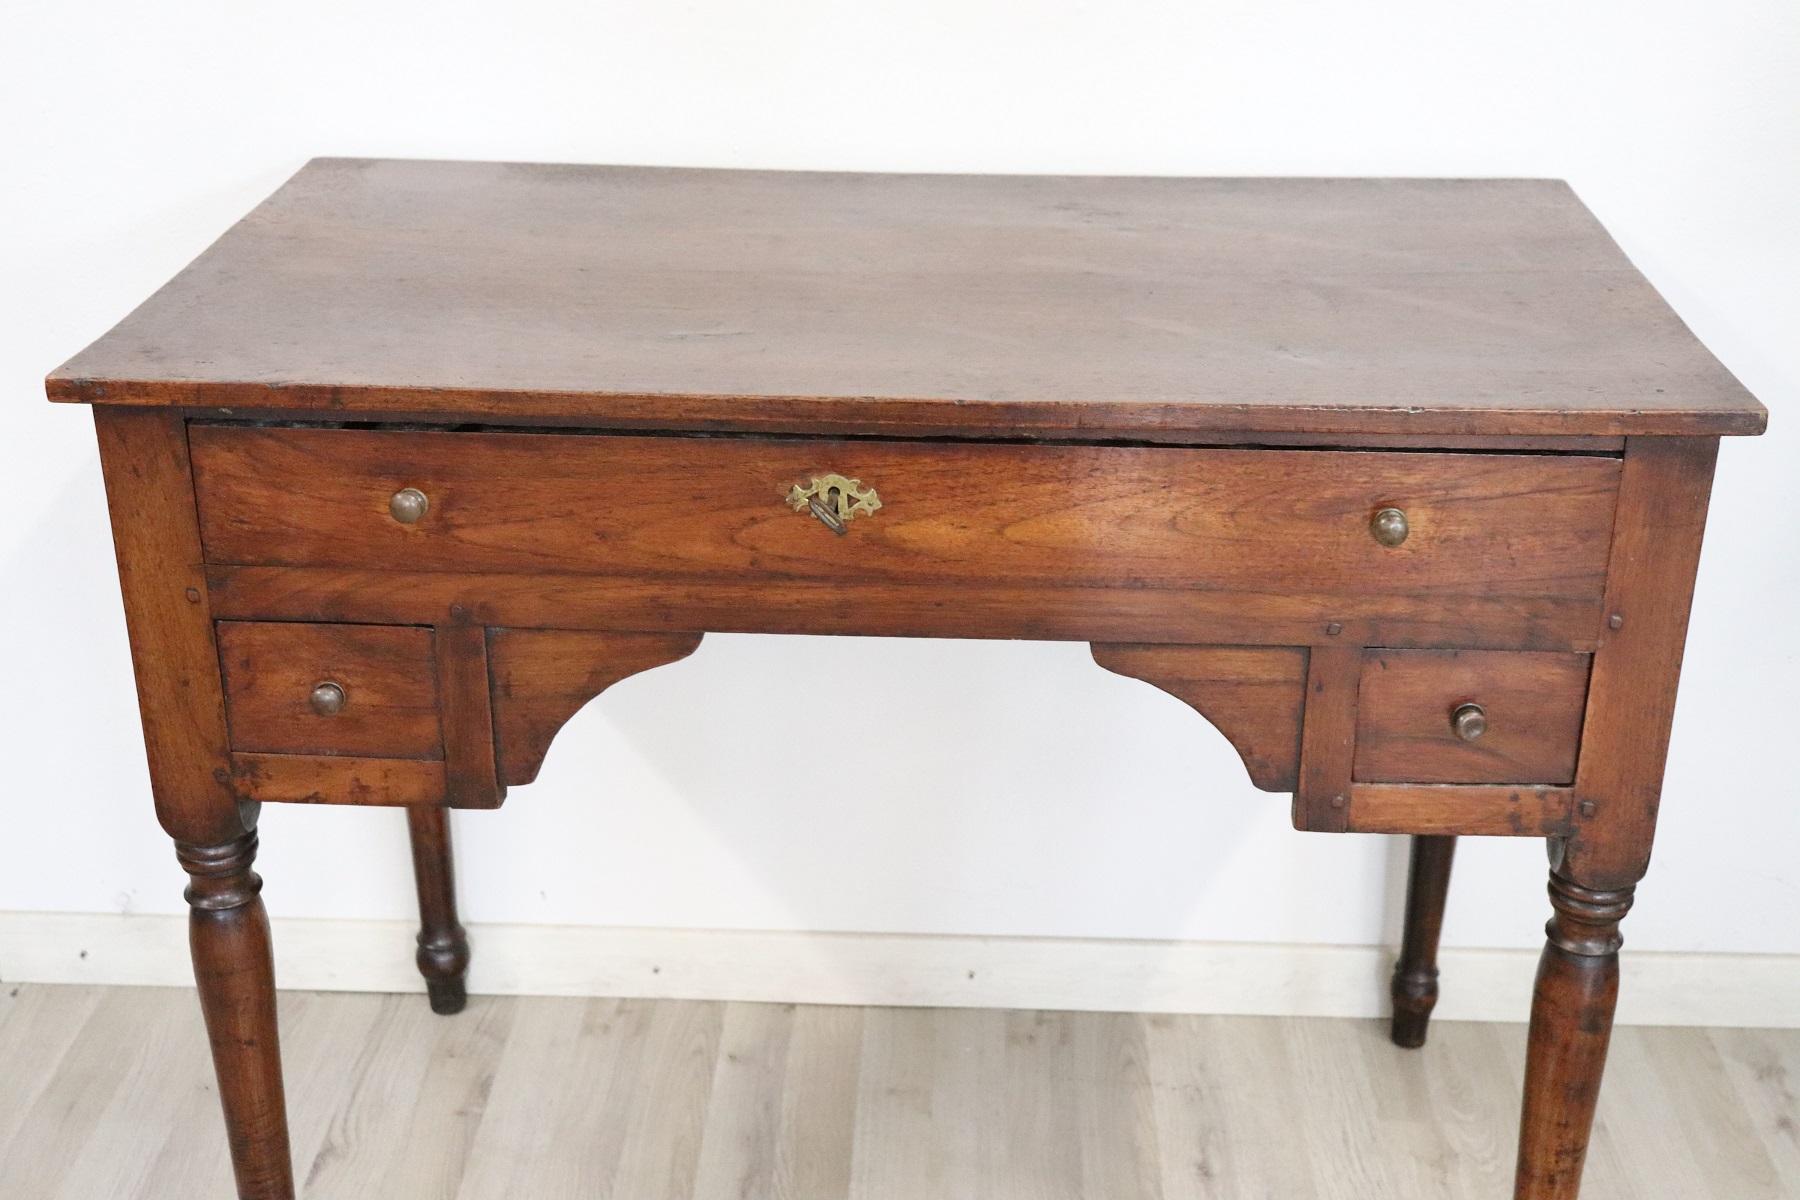 Elegant and essential antique Italian writing desk. Louis Philippe period with classic shapely legs . has a long drawer and two small drawers on the front. Rare and precious walnut. The back of the desk is rough because it is designed to be placed